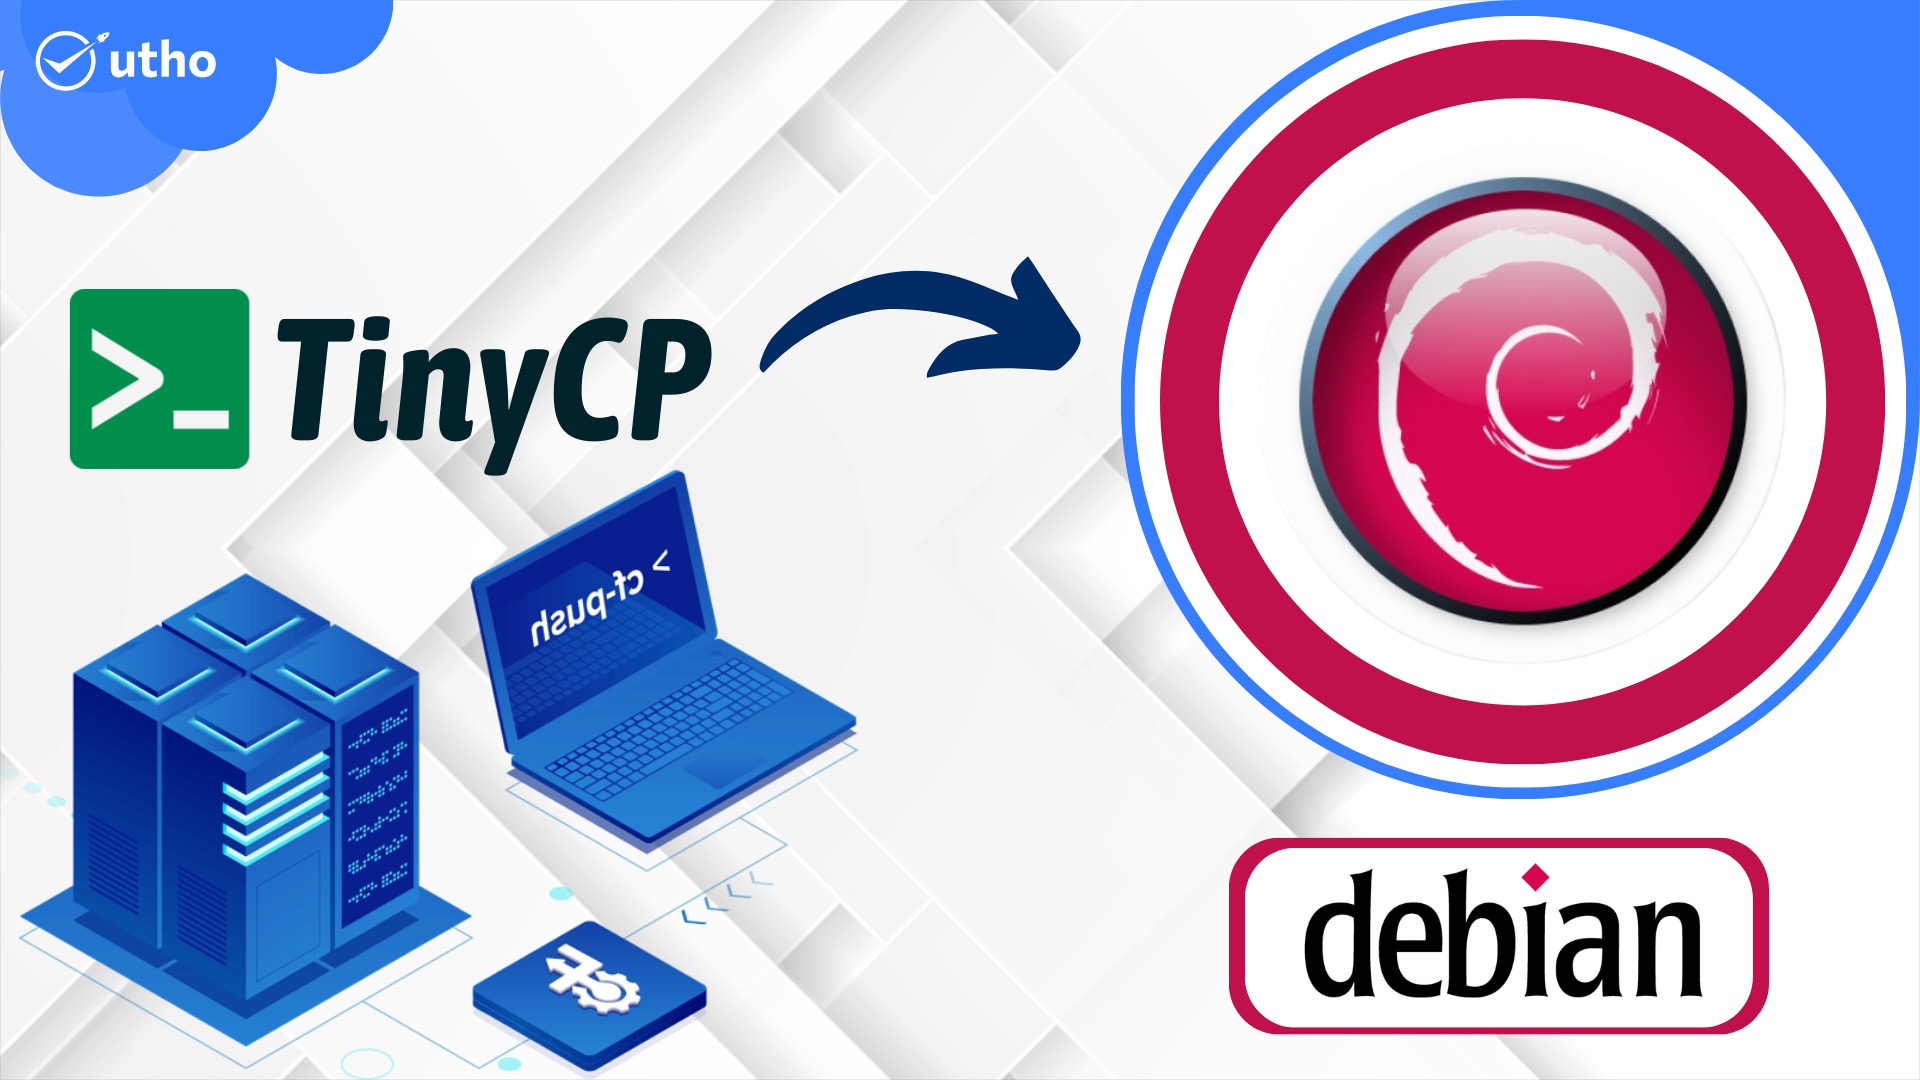 How to Install TinyCP on Debian